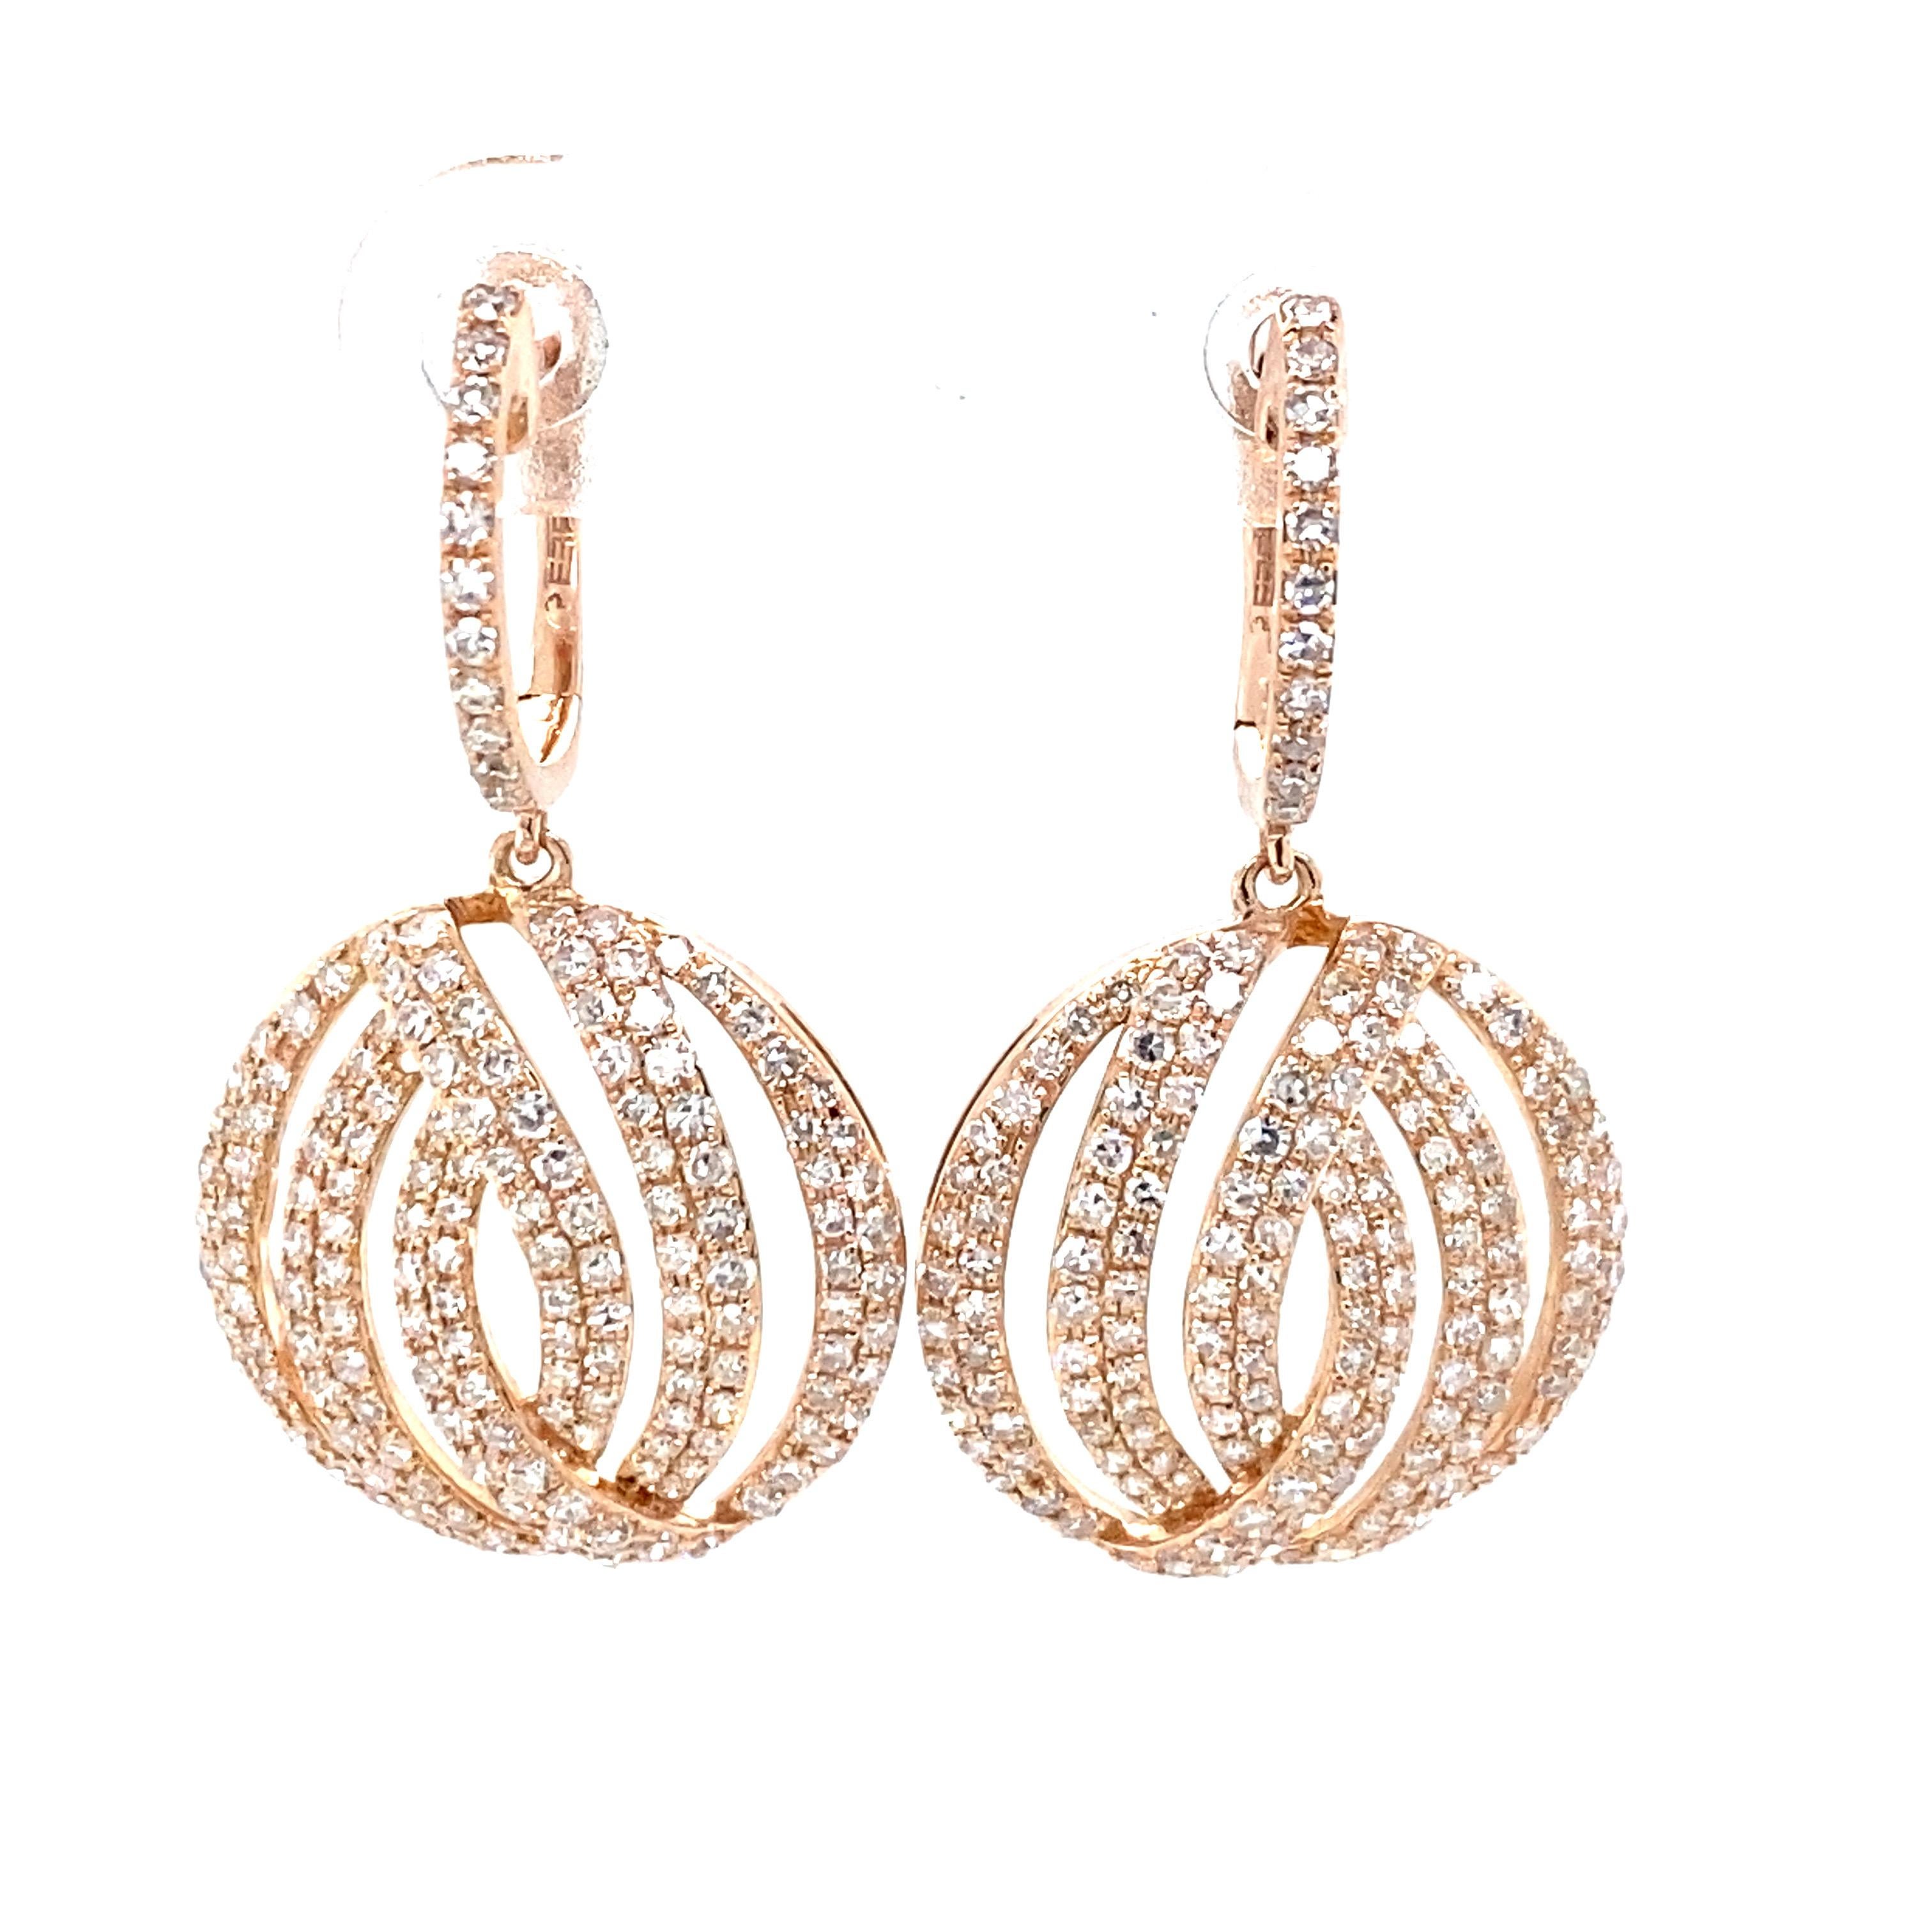 Effy Diamond Dangle Earrings in 14K Rose Gold.  128 Round Brilliant Cut Diamonds weighing 1.0 carat total weight, G-I in color and VS-SI in clarity are expertly set.  The Earrings measure 1 1/8 inch in length and 11/16 inch in width. 4.2 grams.